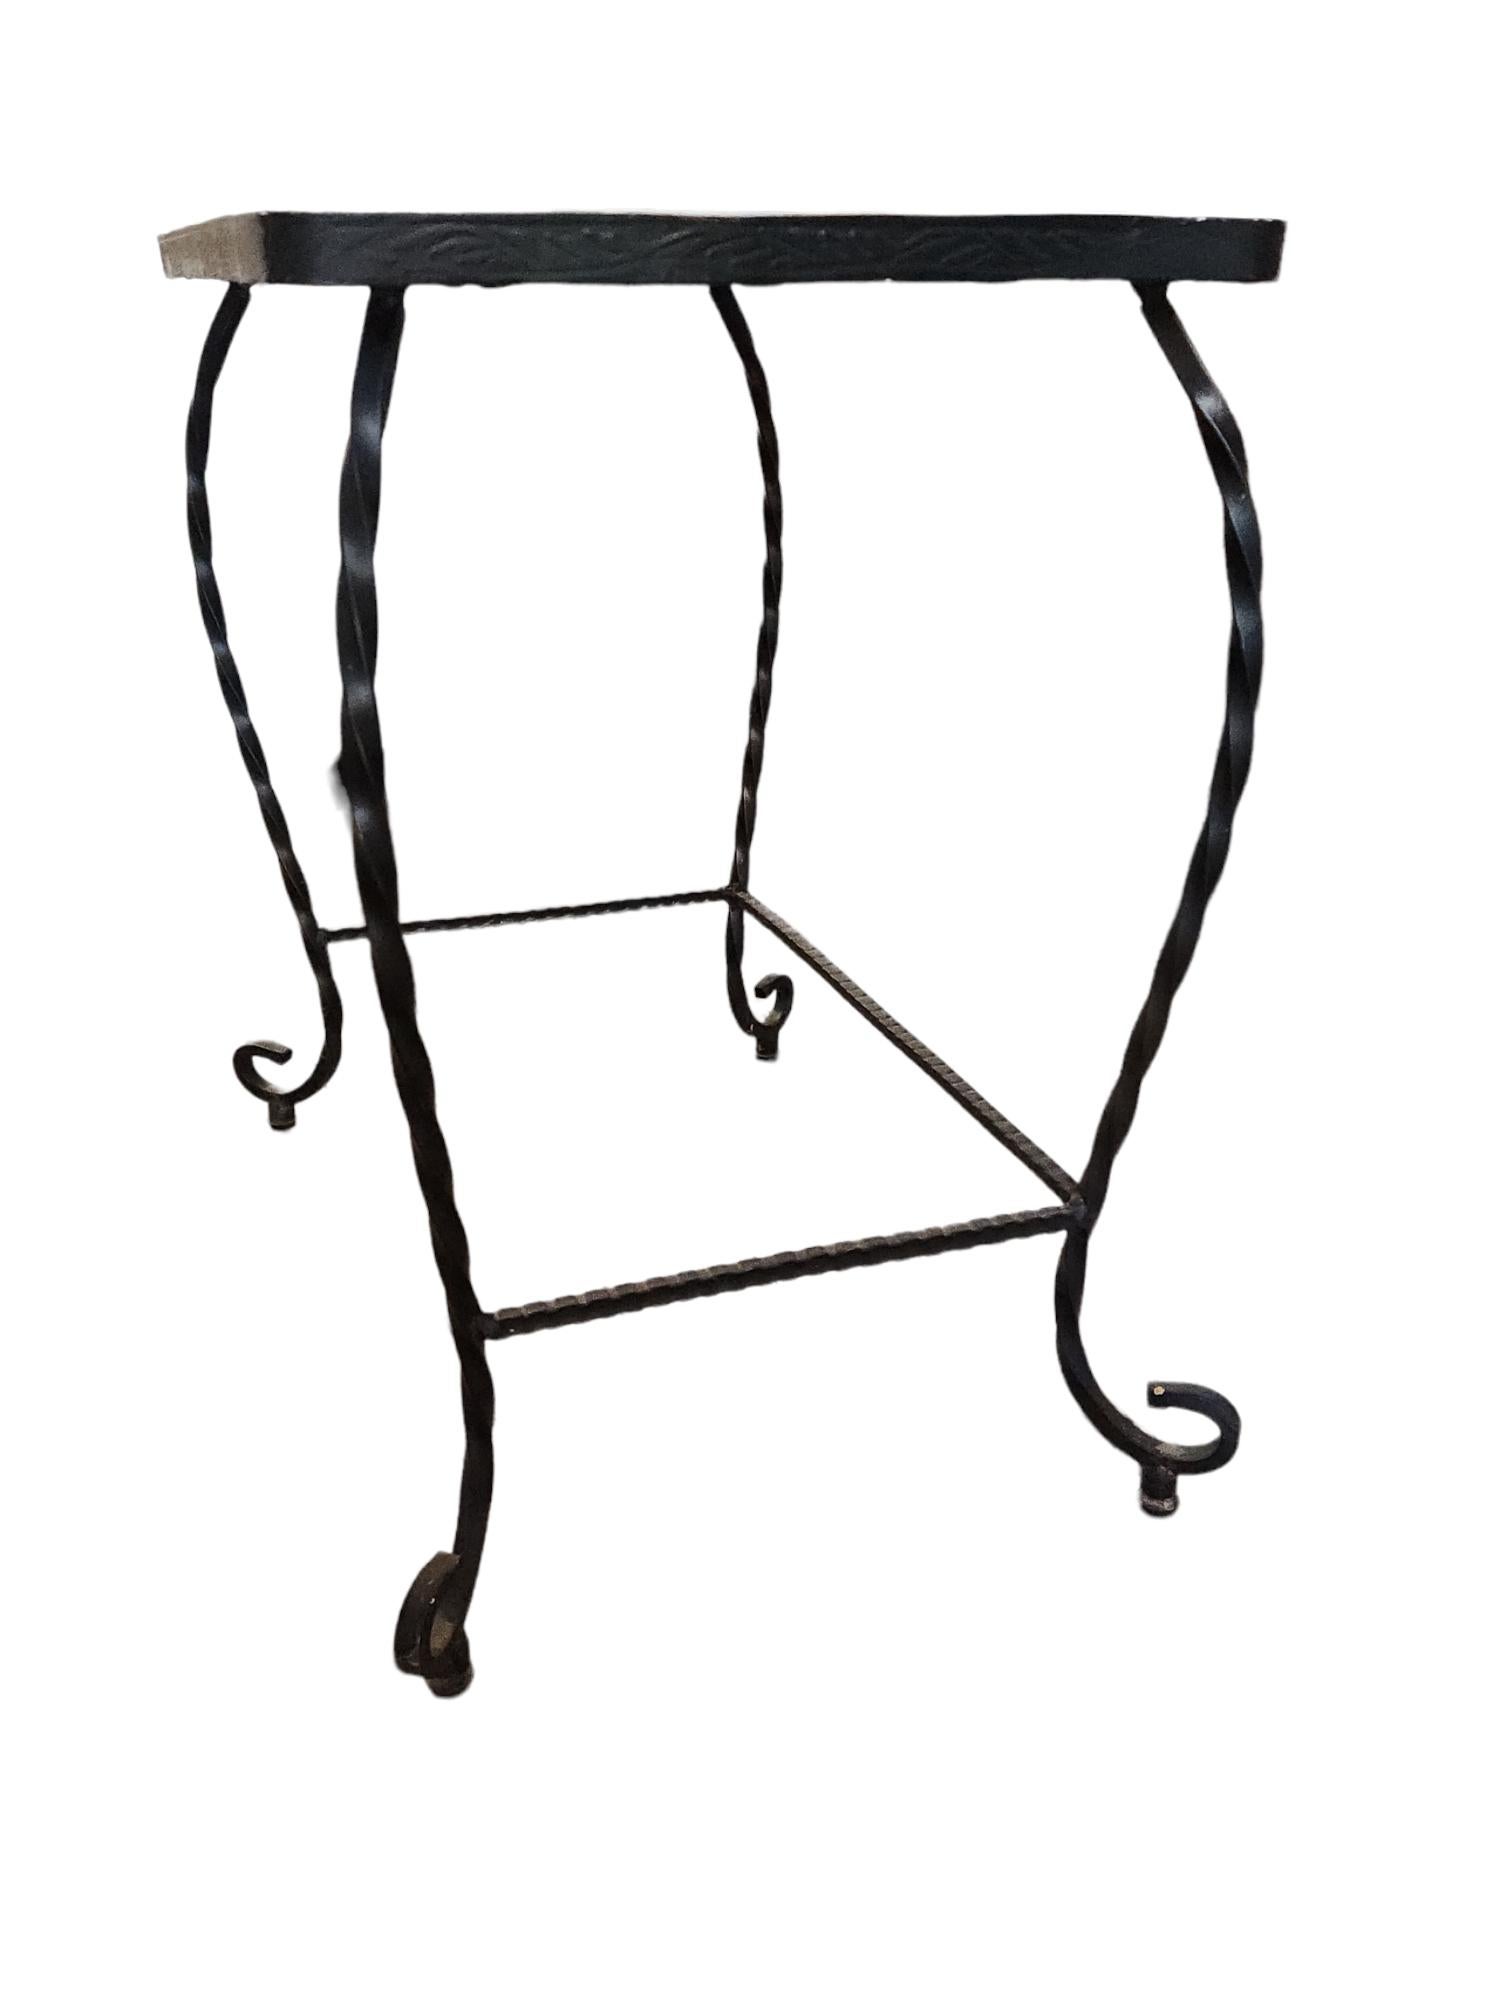 Italian Pair of Twisted Wrought Iron Ceramic Mosaic Side Tables, Italy, 1960 For Sale